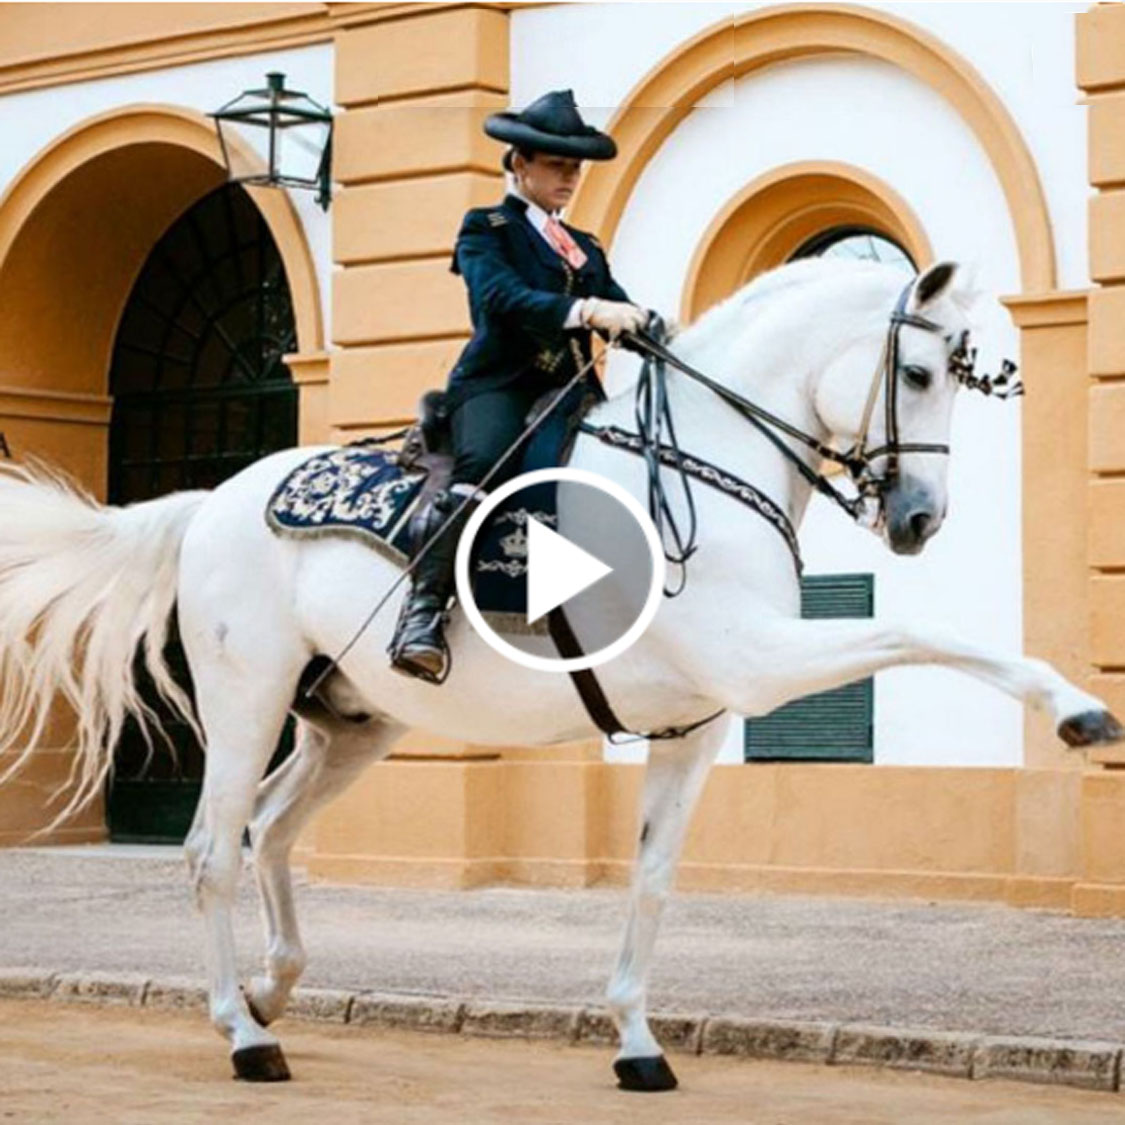 Royal Andalusian School of Equestrian Art